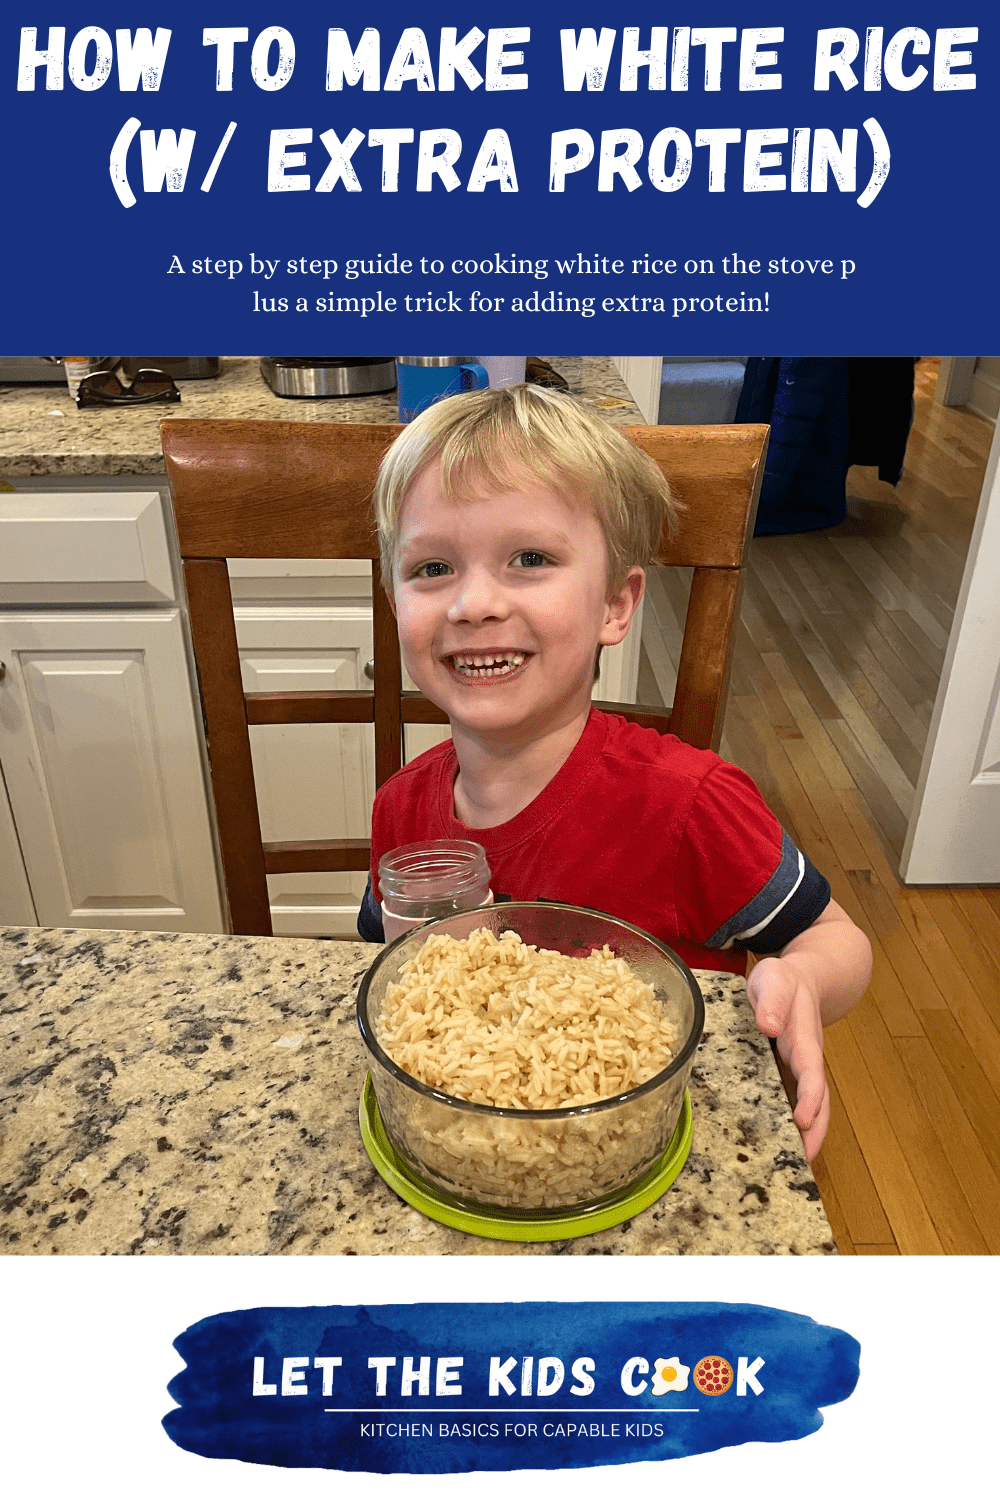 Learn how to make white rice on the stove with extra protein! This easy tip will help you add protein to your favorite side dish - perfect for kids and for adults looking to increase their protein intake.